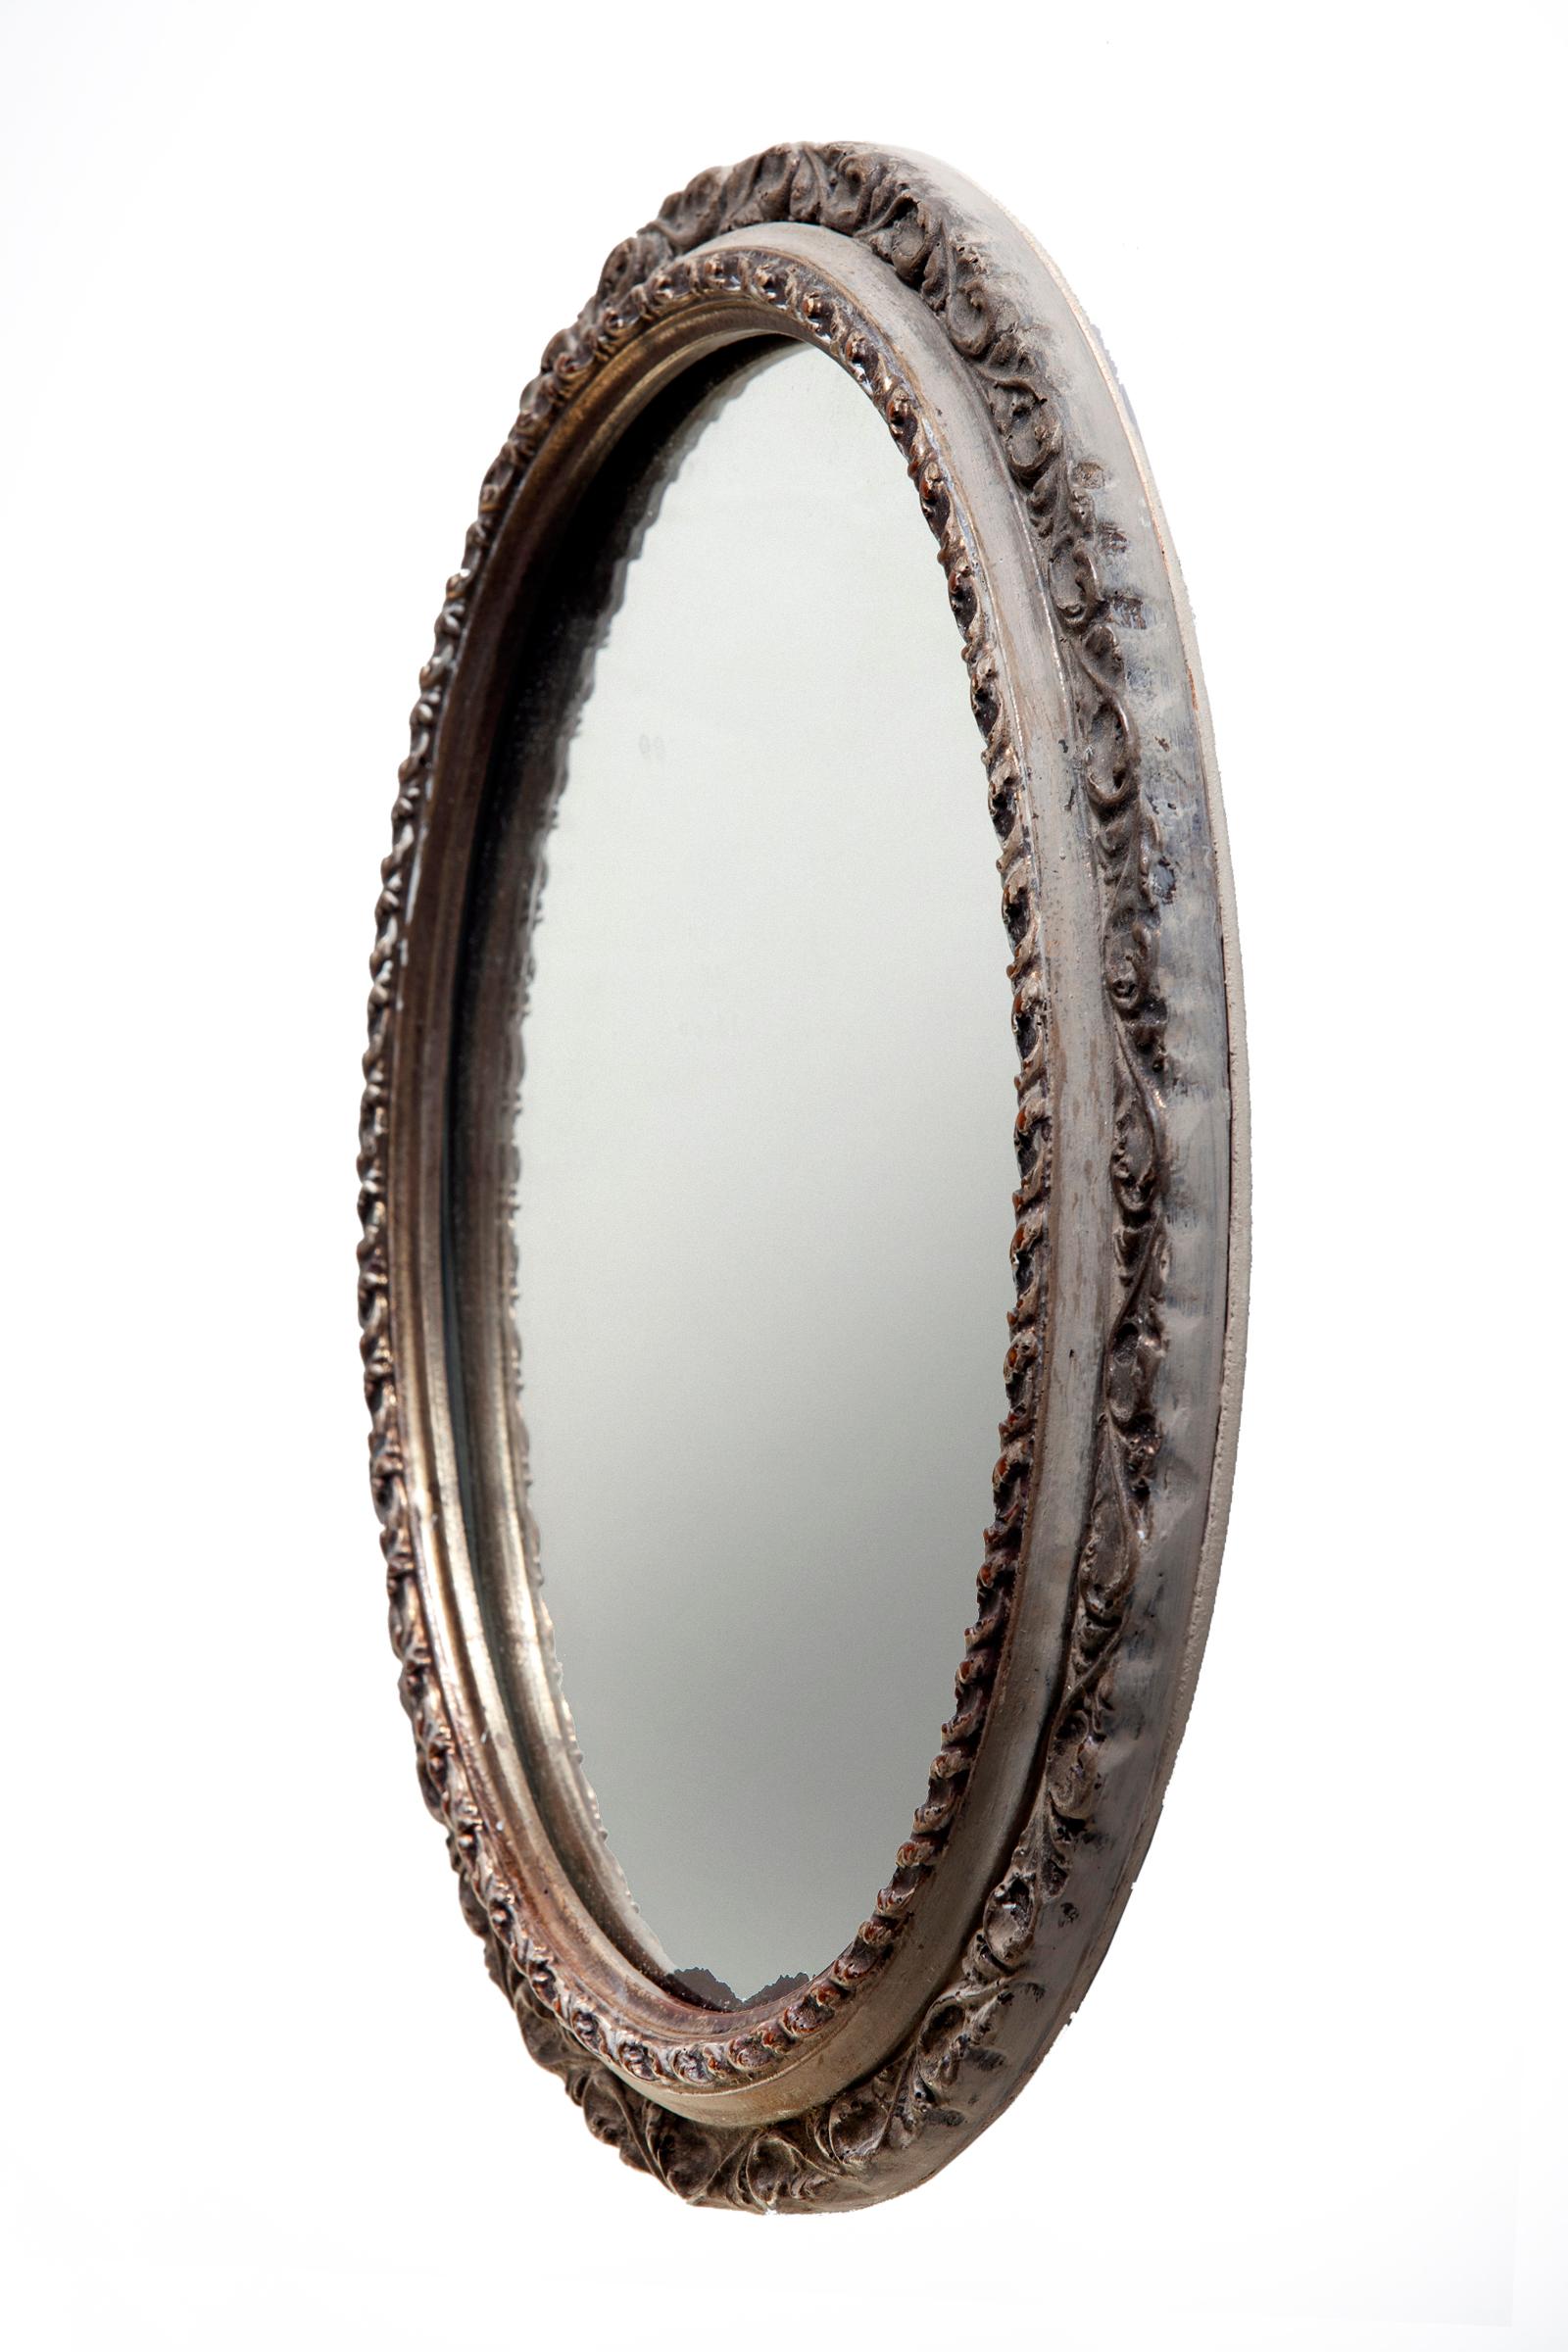 French Provincial Hollywood Regency Petite Italian Oval Mirror For Sale